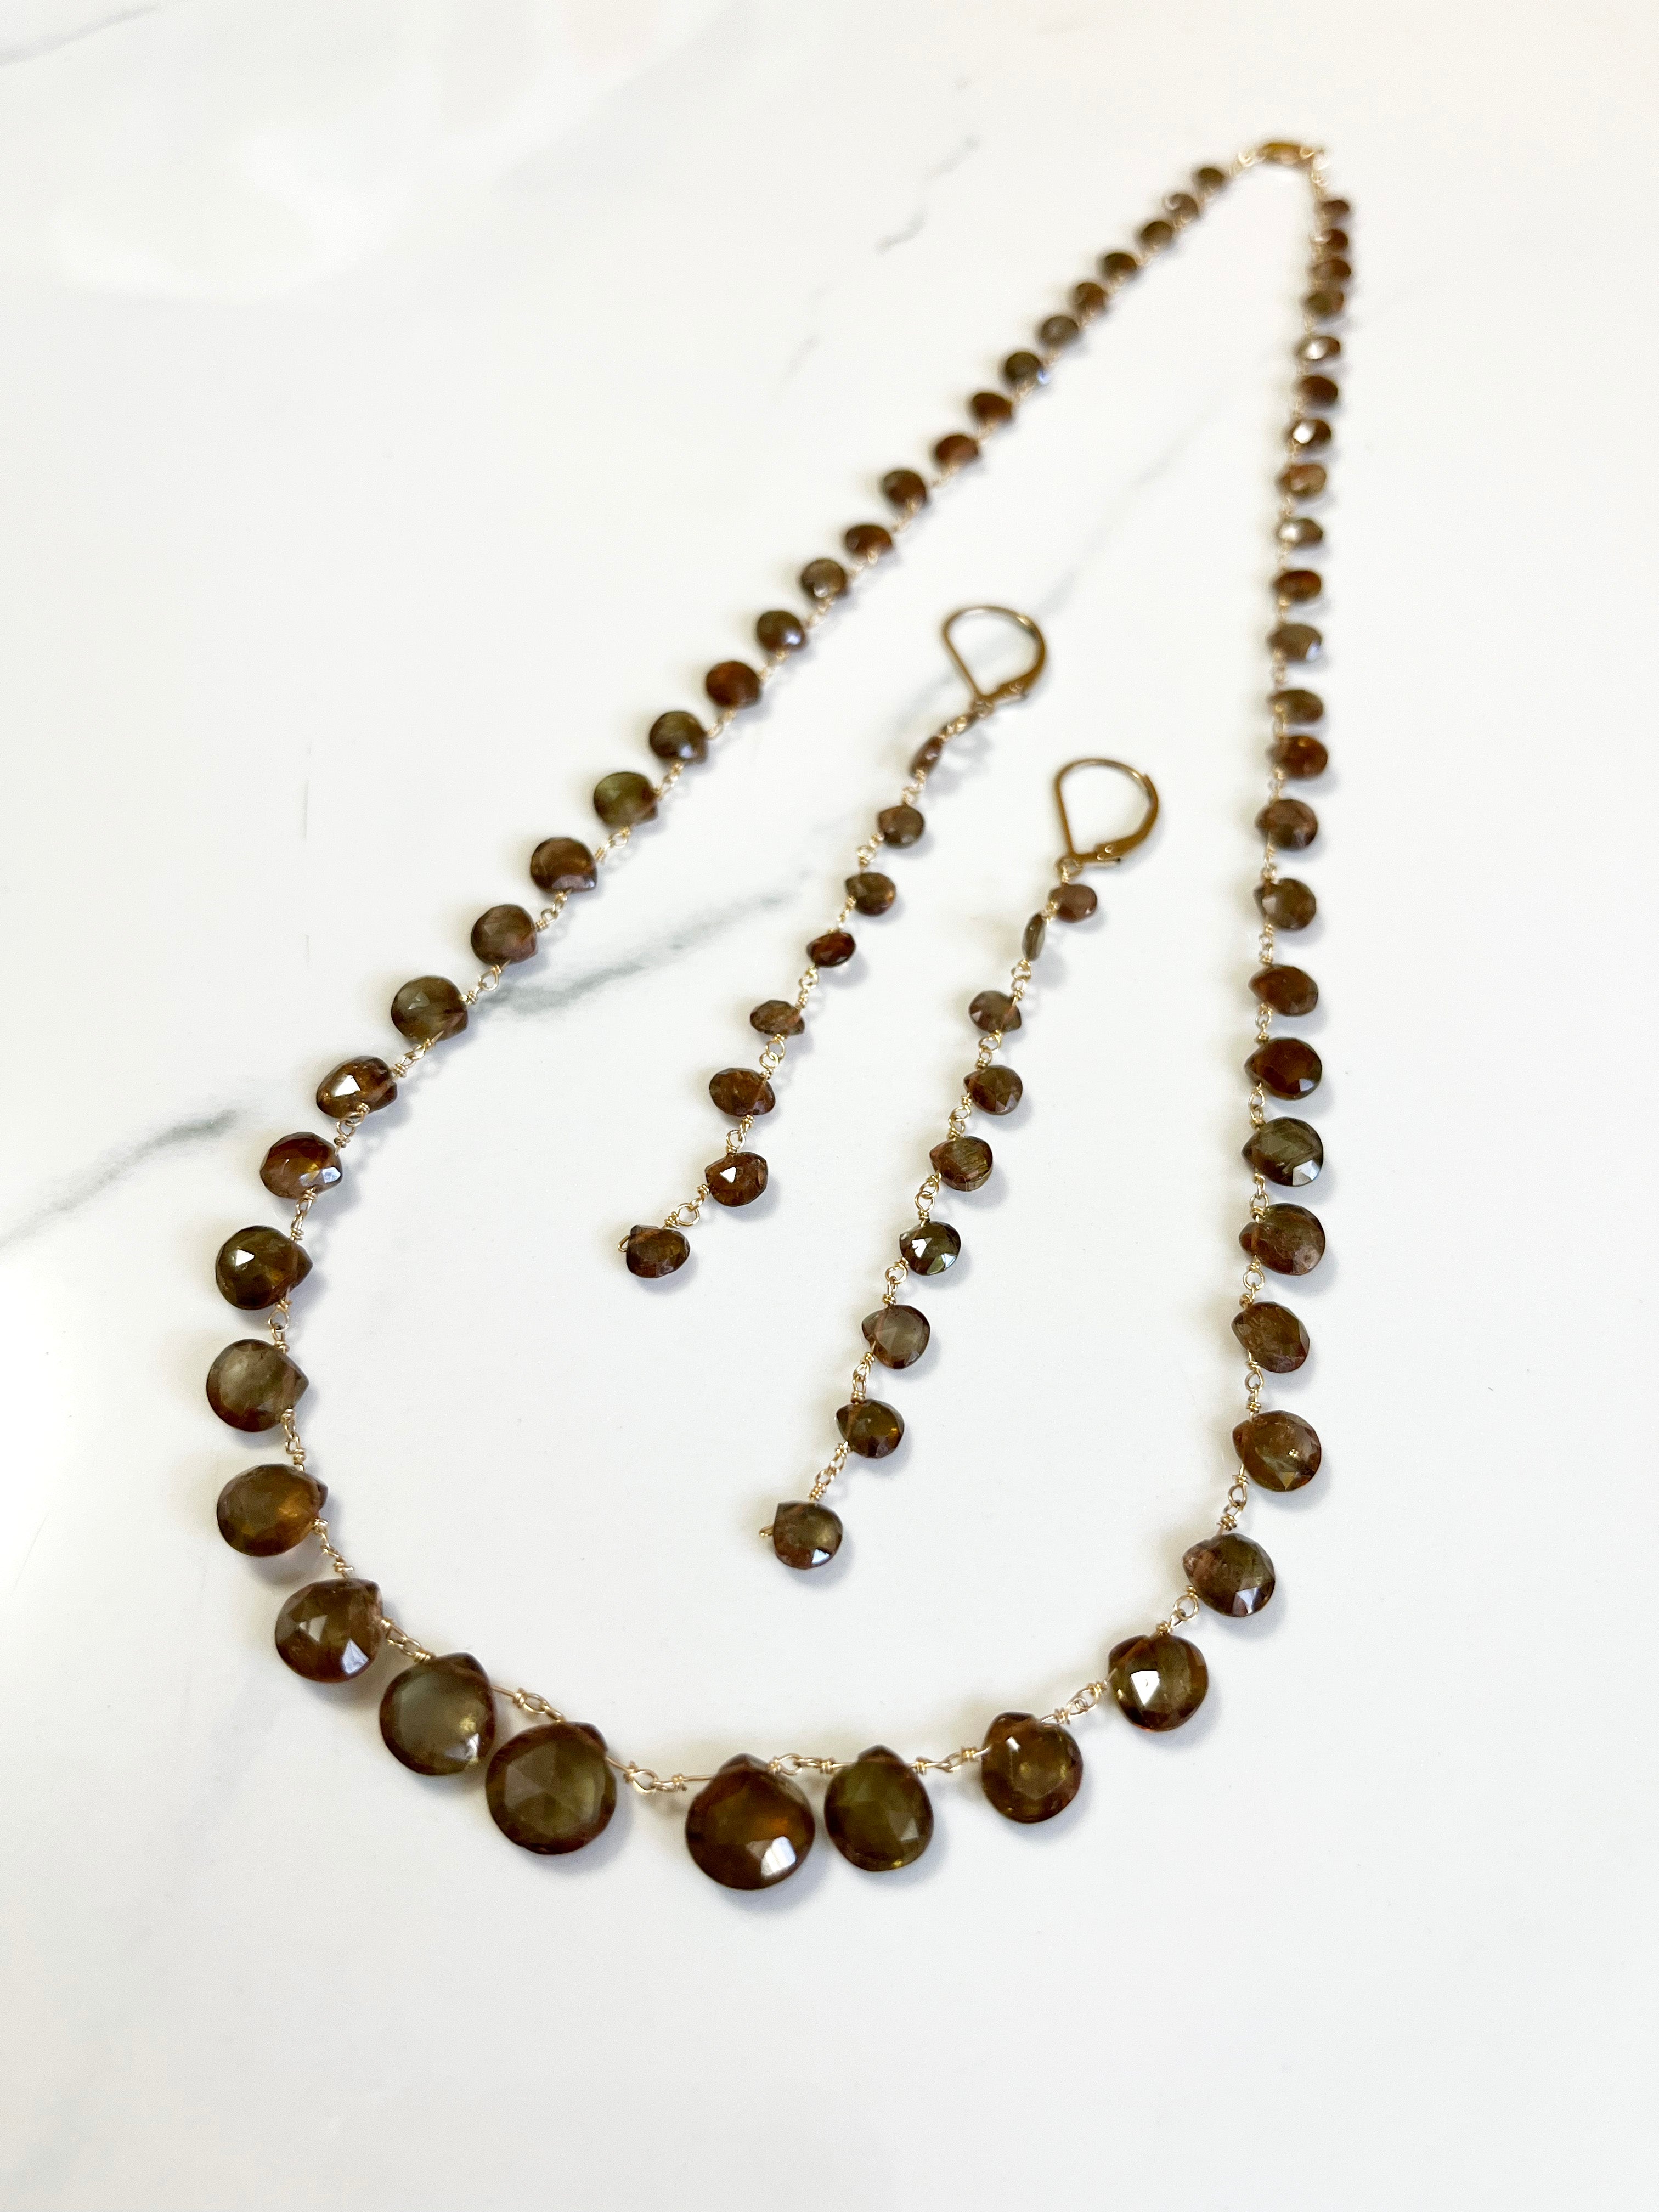 Andradite Garnet necklace and earrings